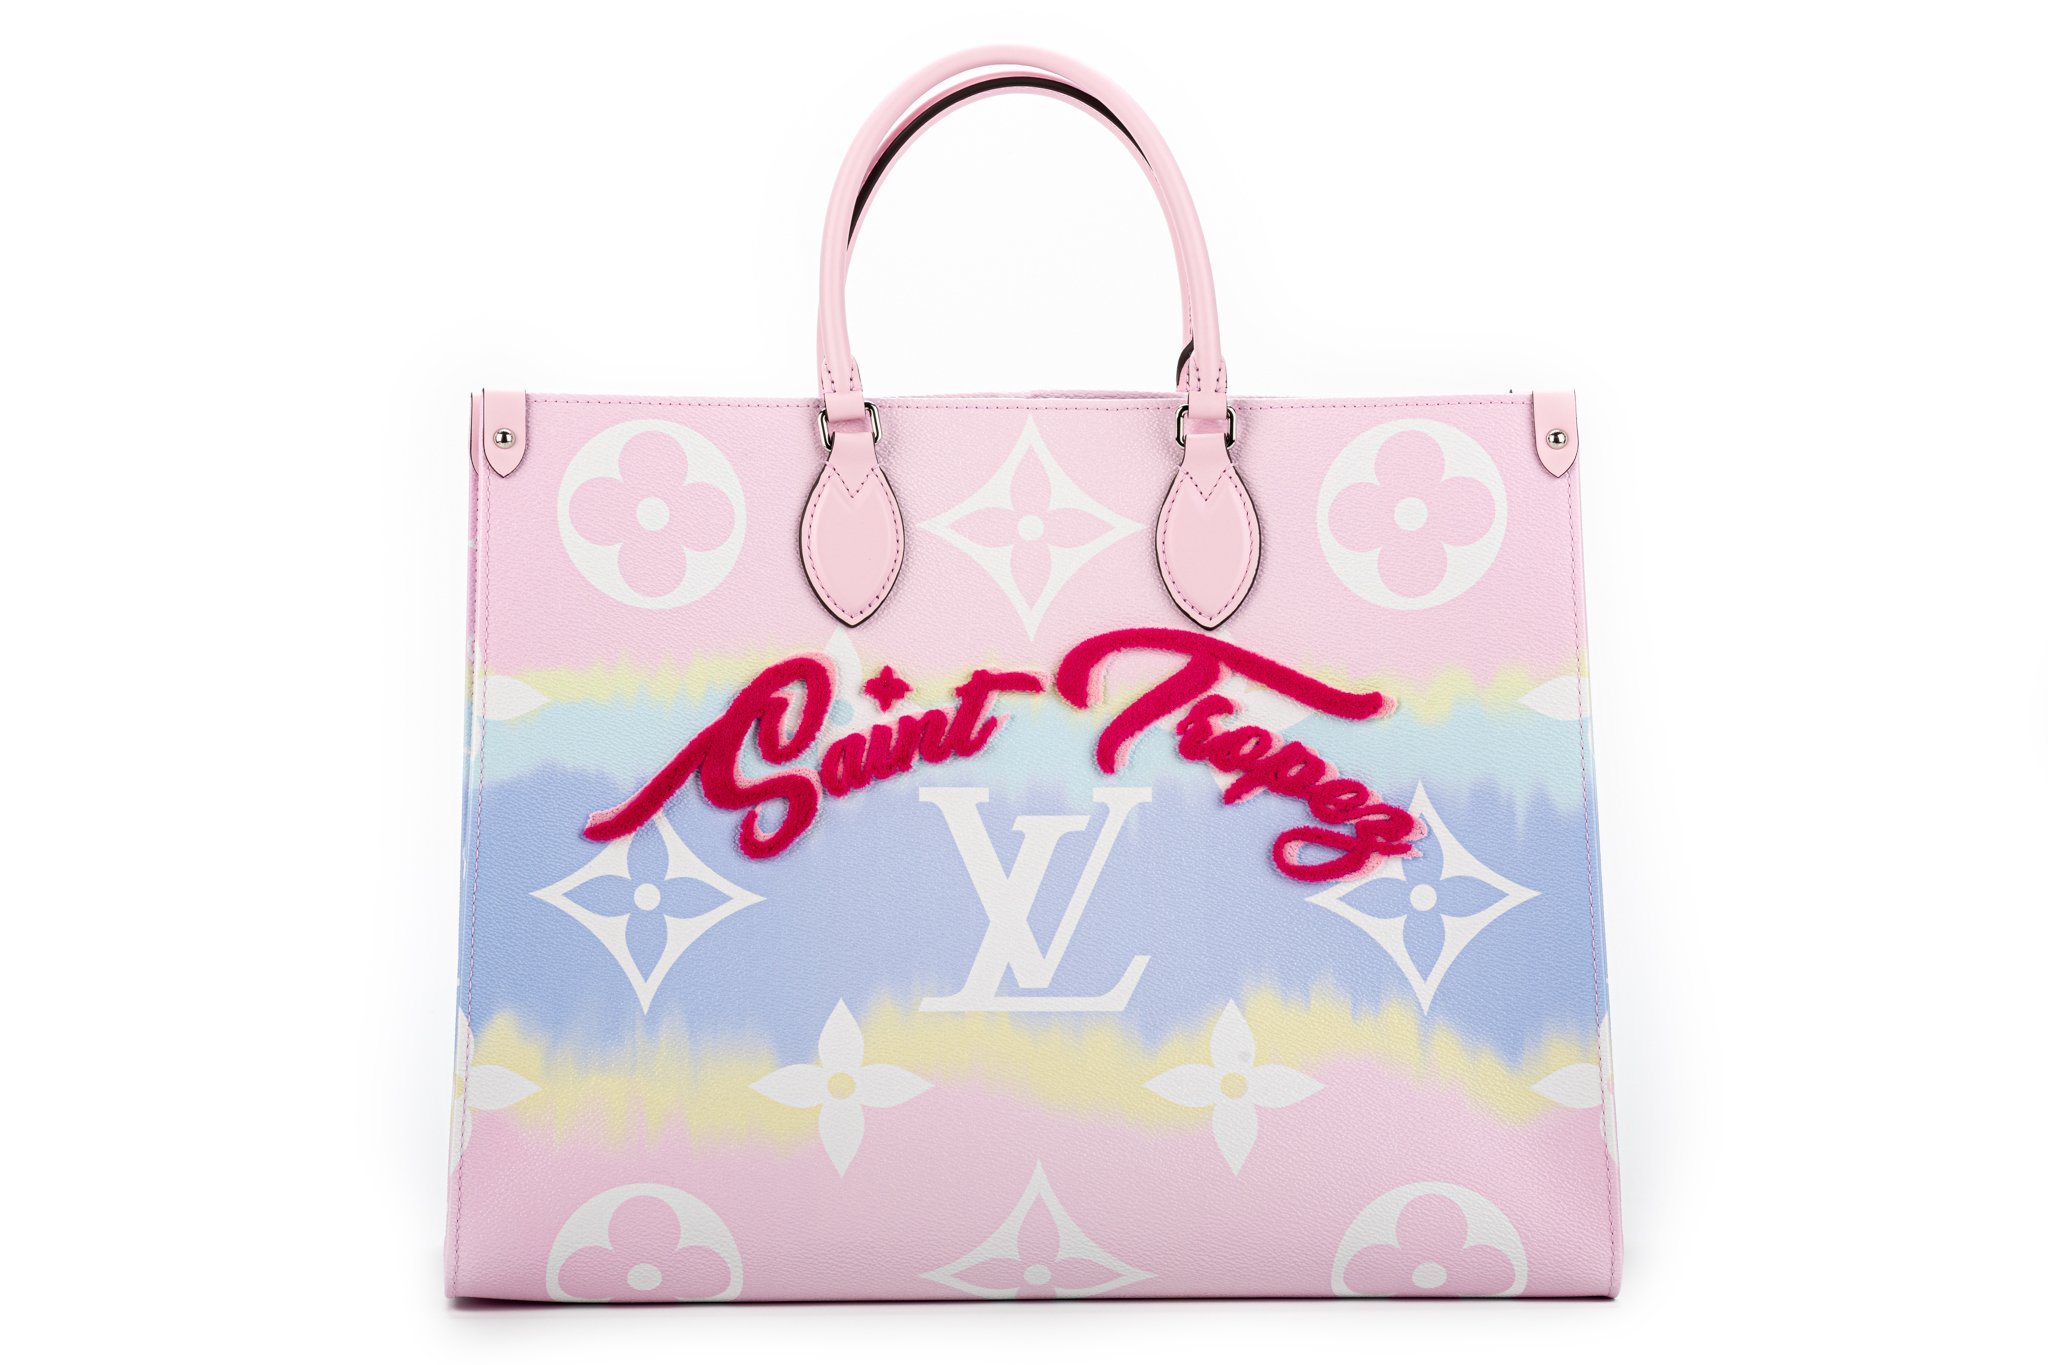 NEW - LIMITED SERIES - Louis Vuitton Onthego tote bag Escale